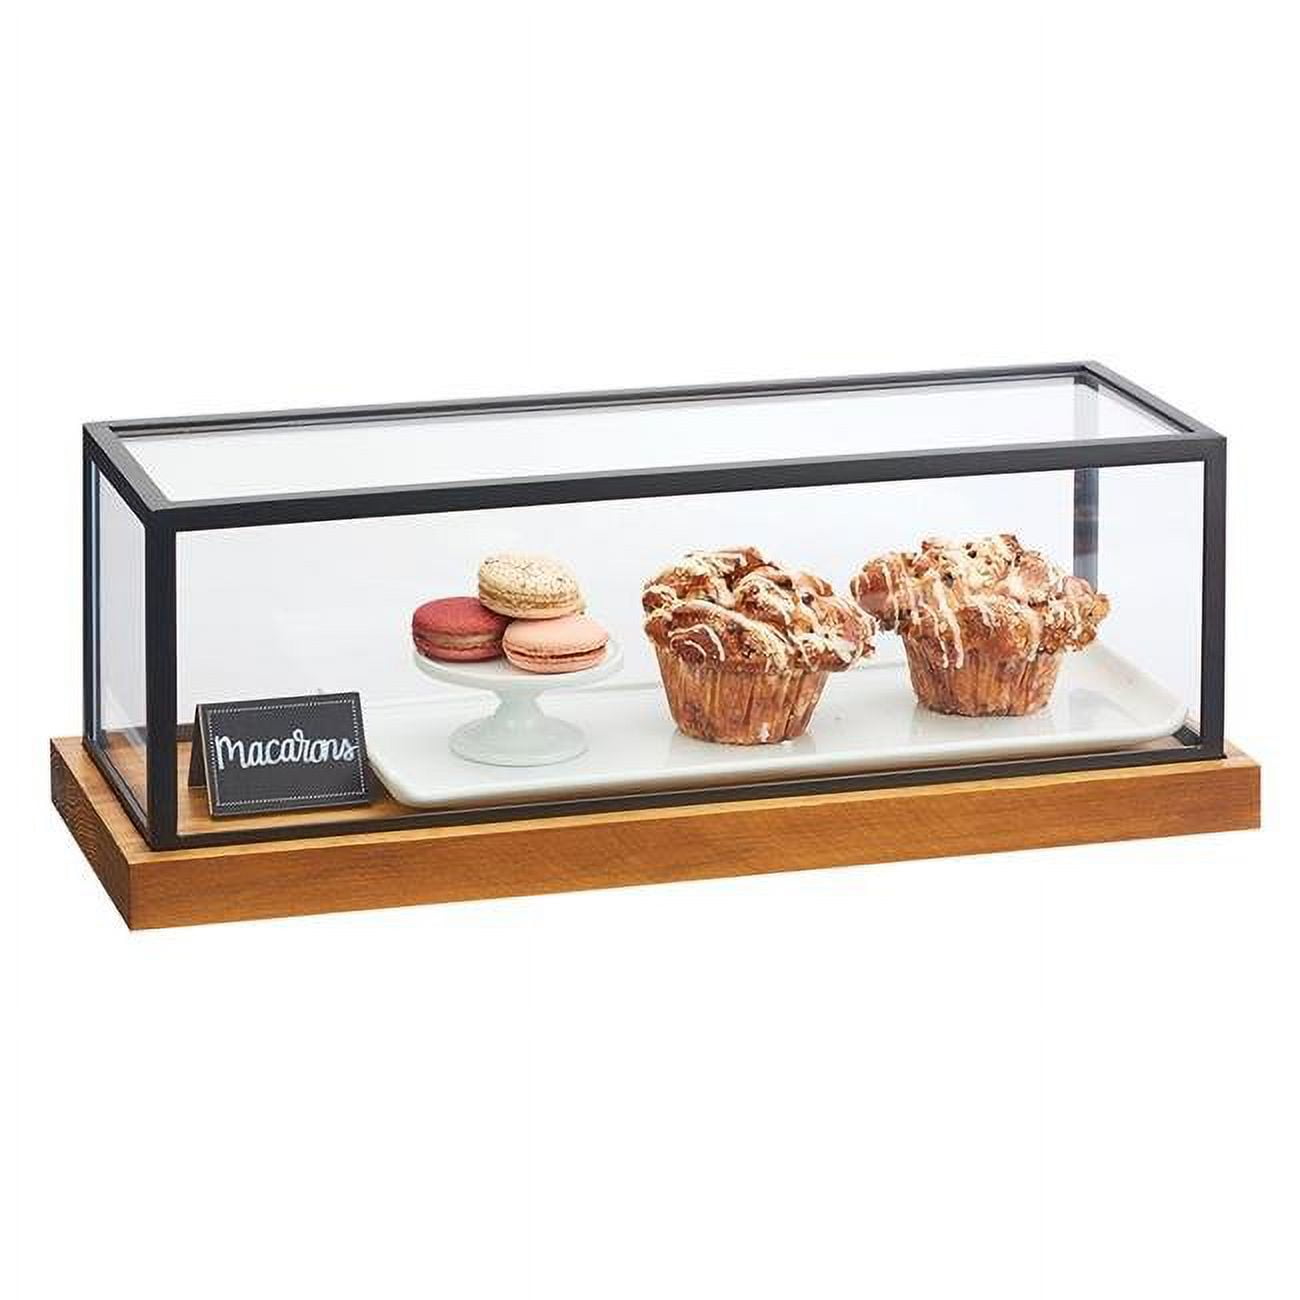 Picture of Cal Mil 3648-822-99 Madera Presentation Case - 20 x 8 x 7.75 in.